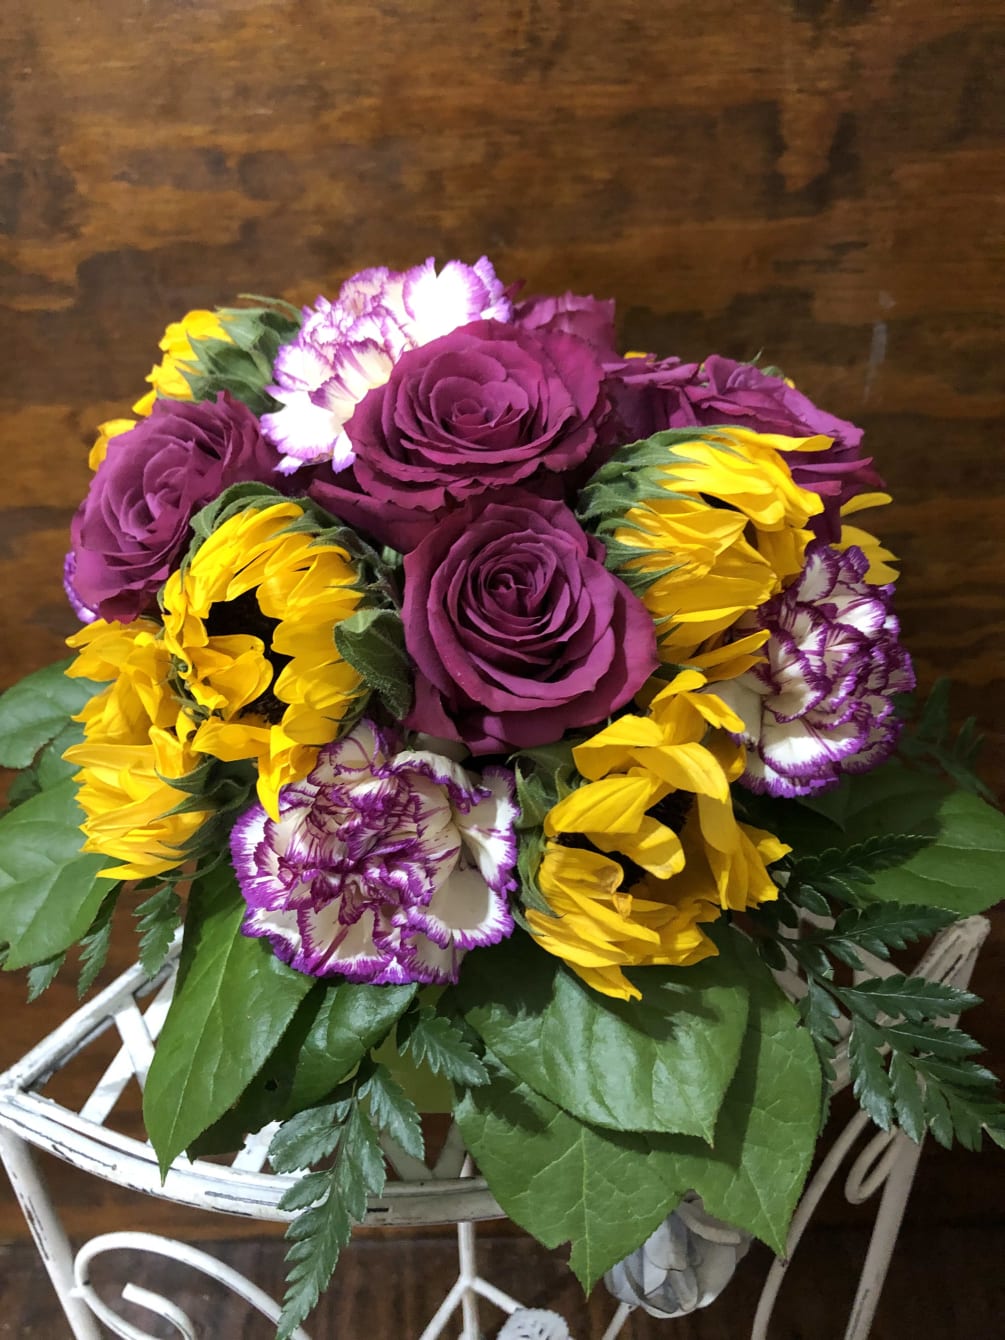 This Sunflower floral arrangement can be sent as multi purpose , from